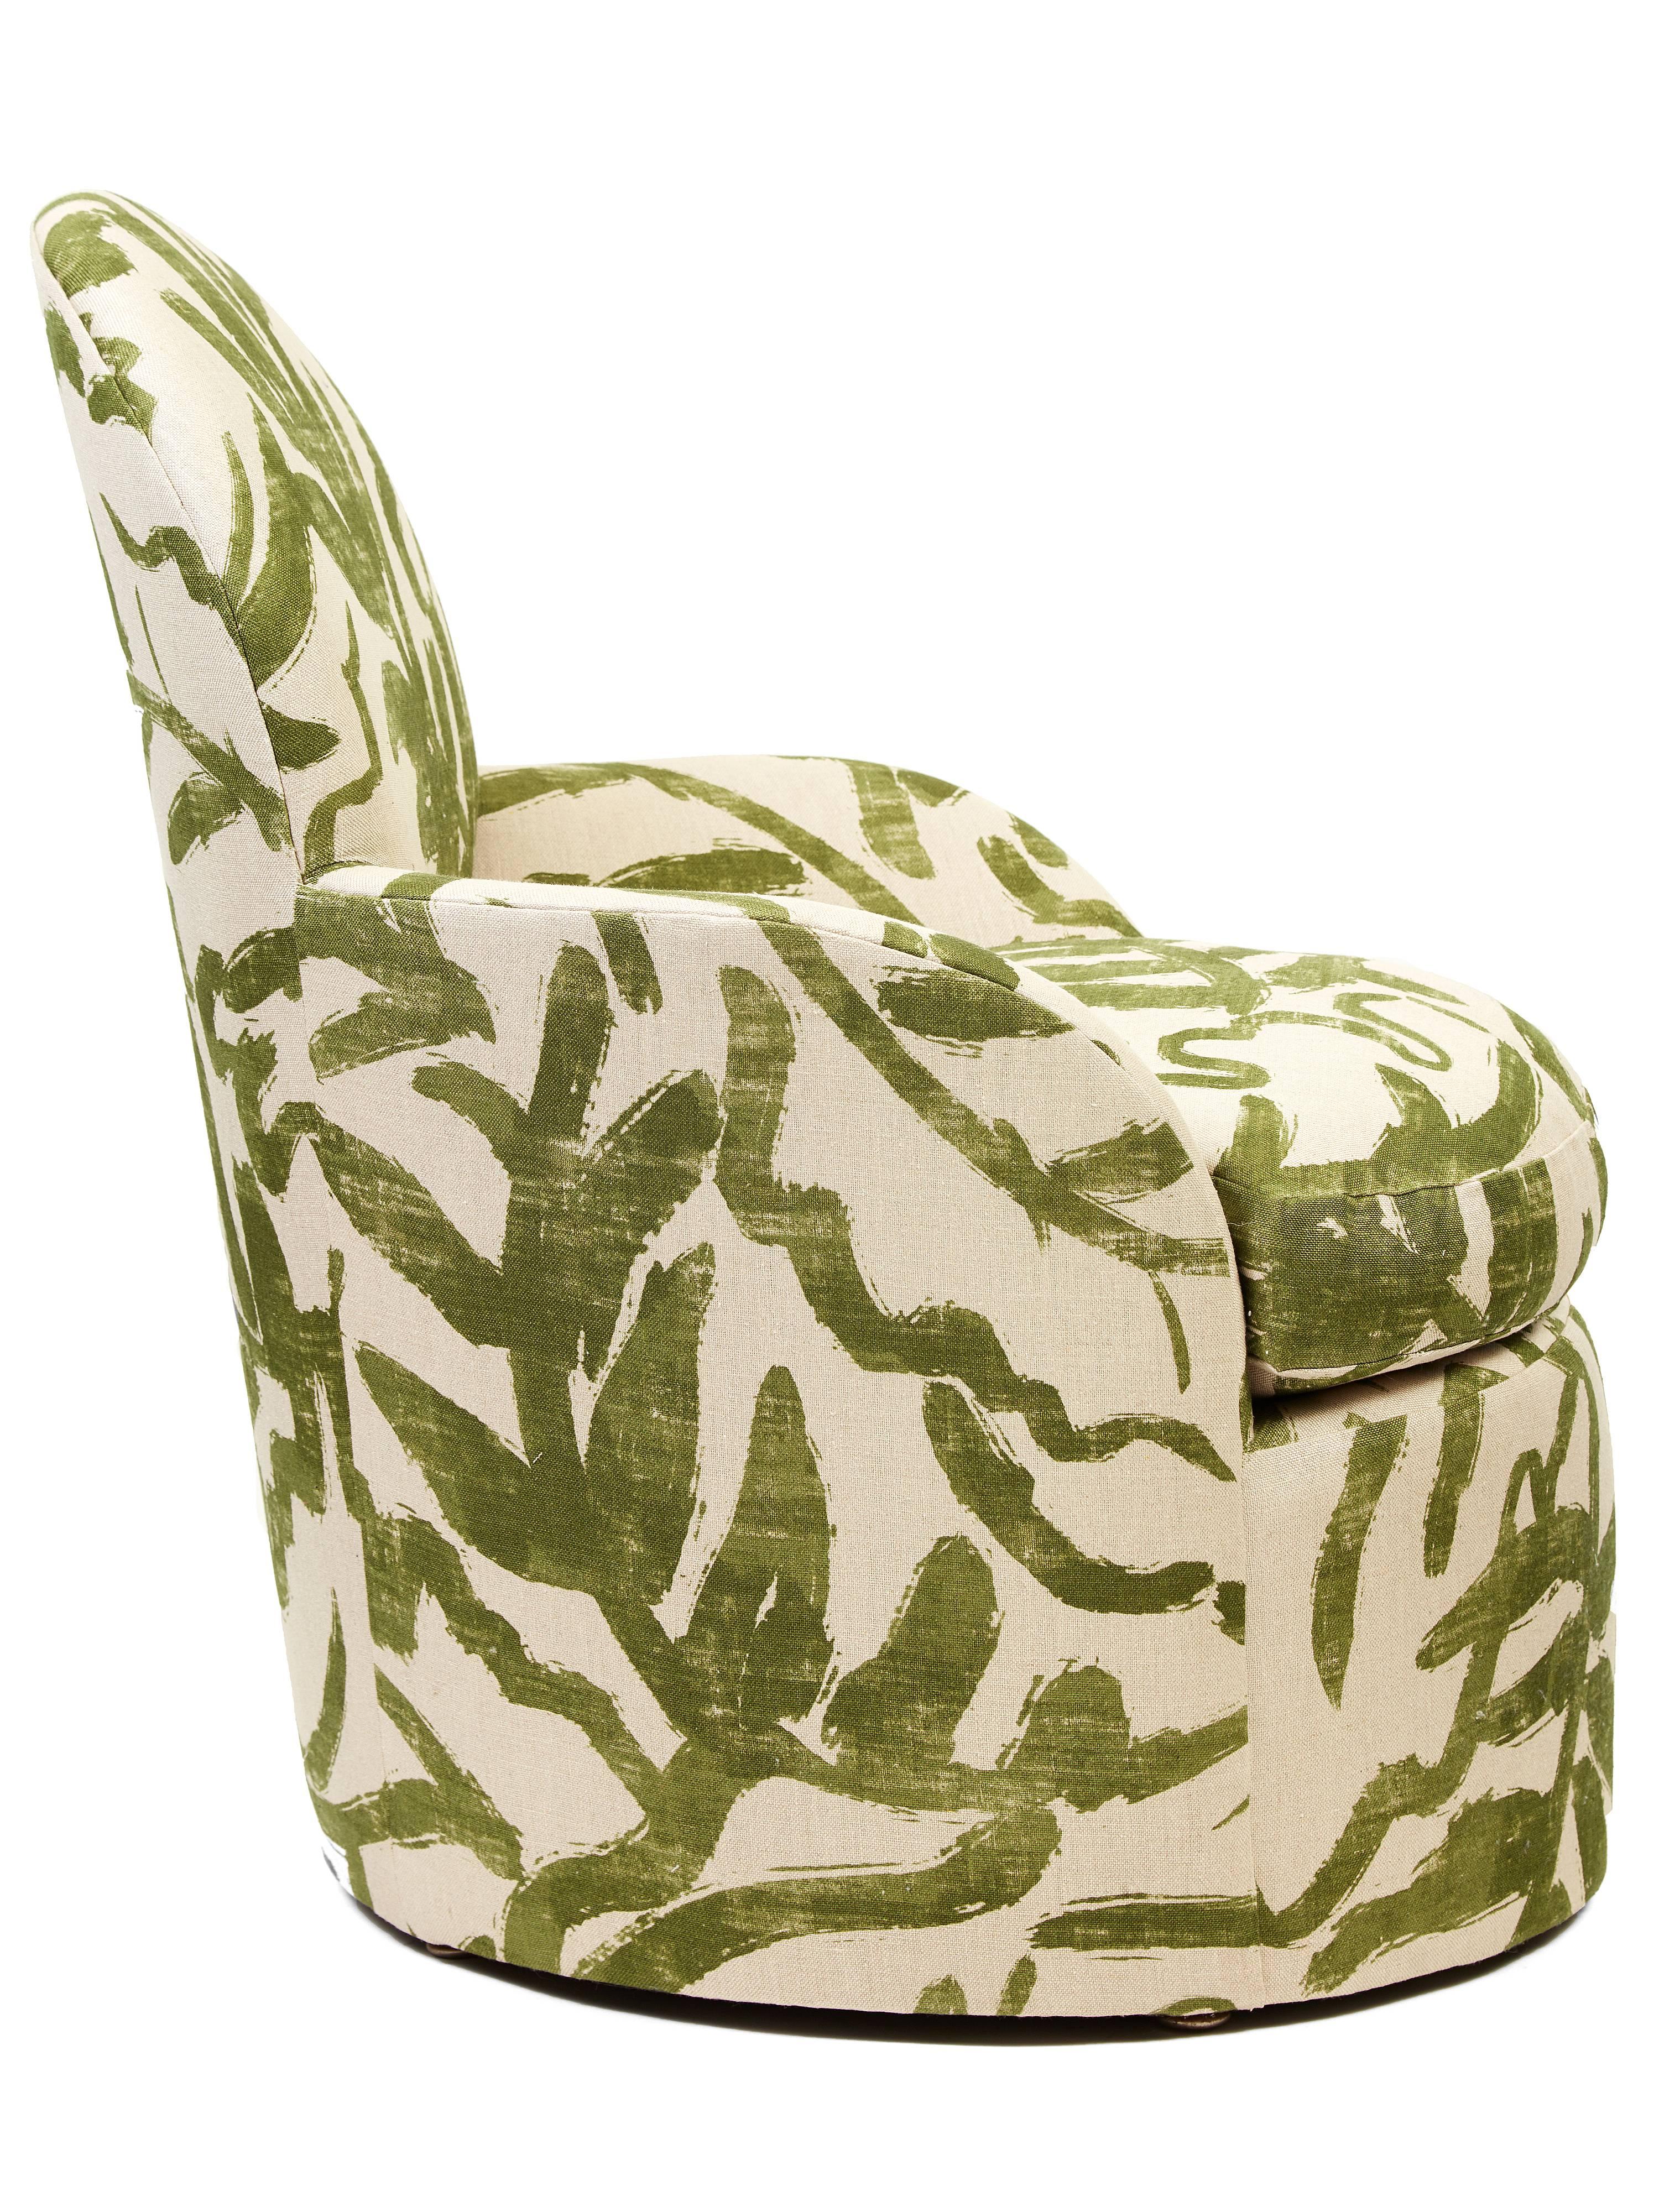 This fully restored 1970s slipper chair’s glamorous proportions make it the ideal canvas for a painterly linen print. Expertly upholstered in Zak + Fox's Sauvage fabric, the pattern seamlessly transitions from back to seat to base, creating the